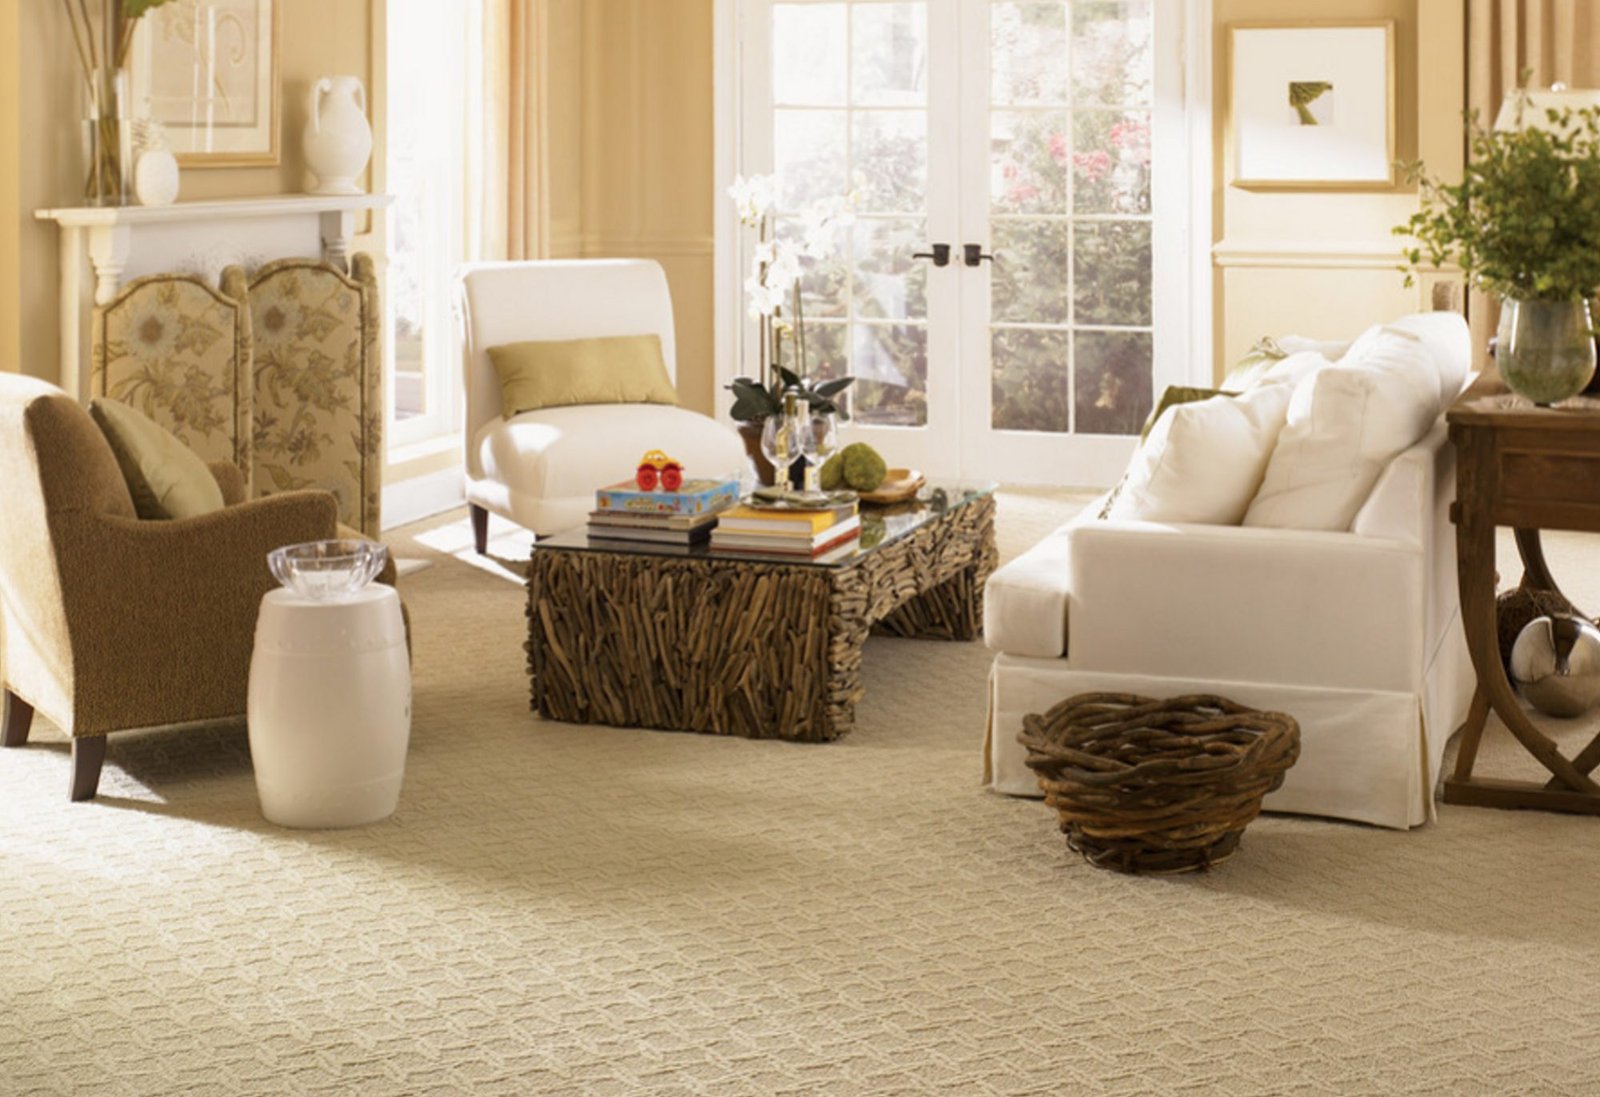 How to Get Longer Use of Your Carpet with These Five Easy Tips